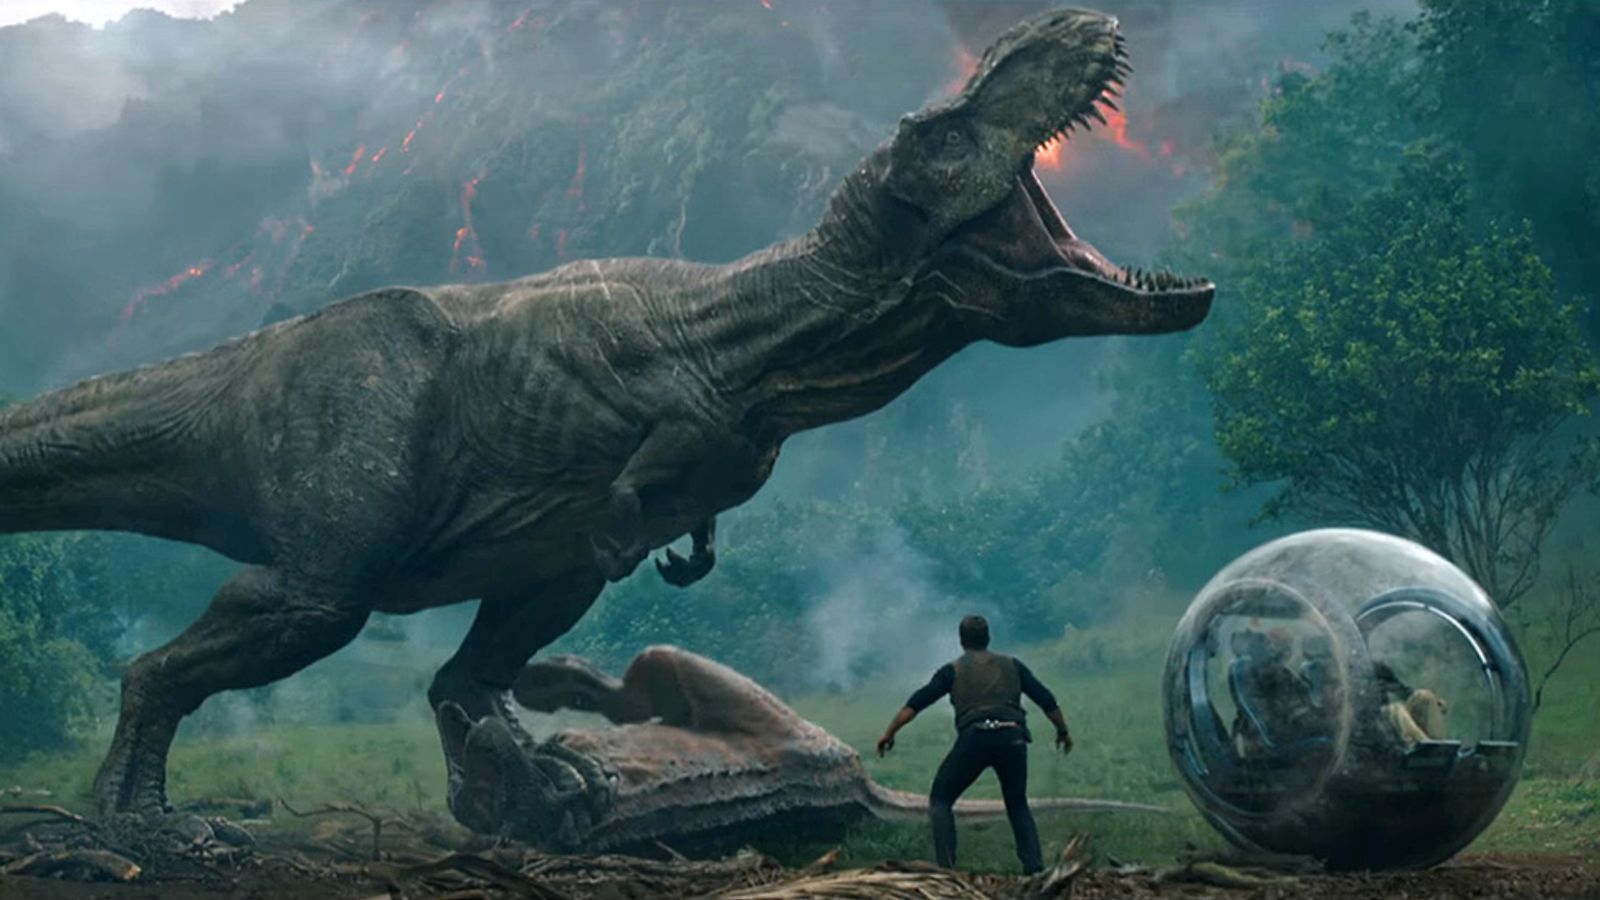 Jurassic World: Fallen Kingdom review. The movie and me